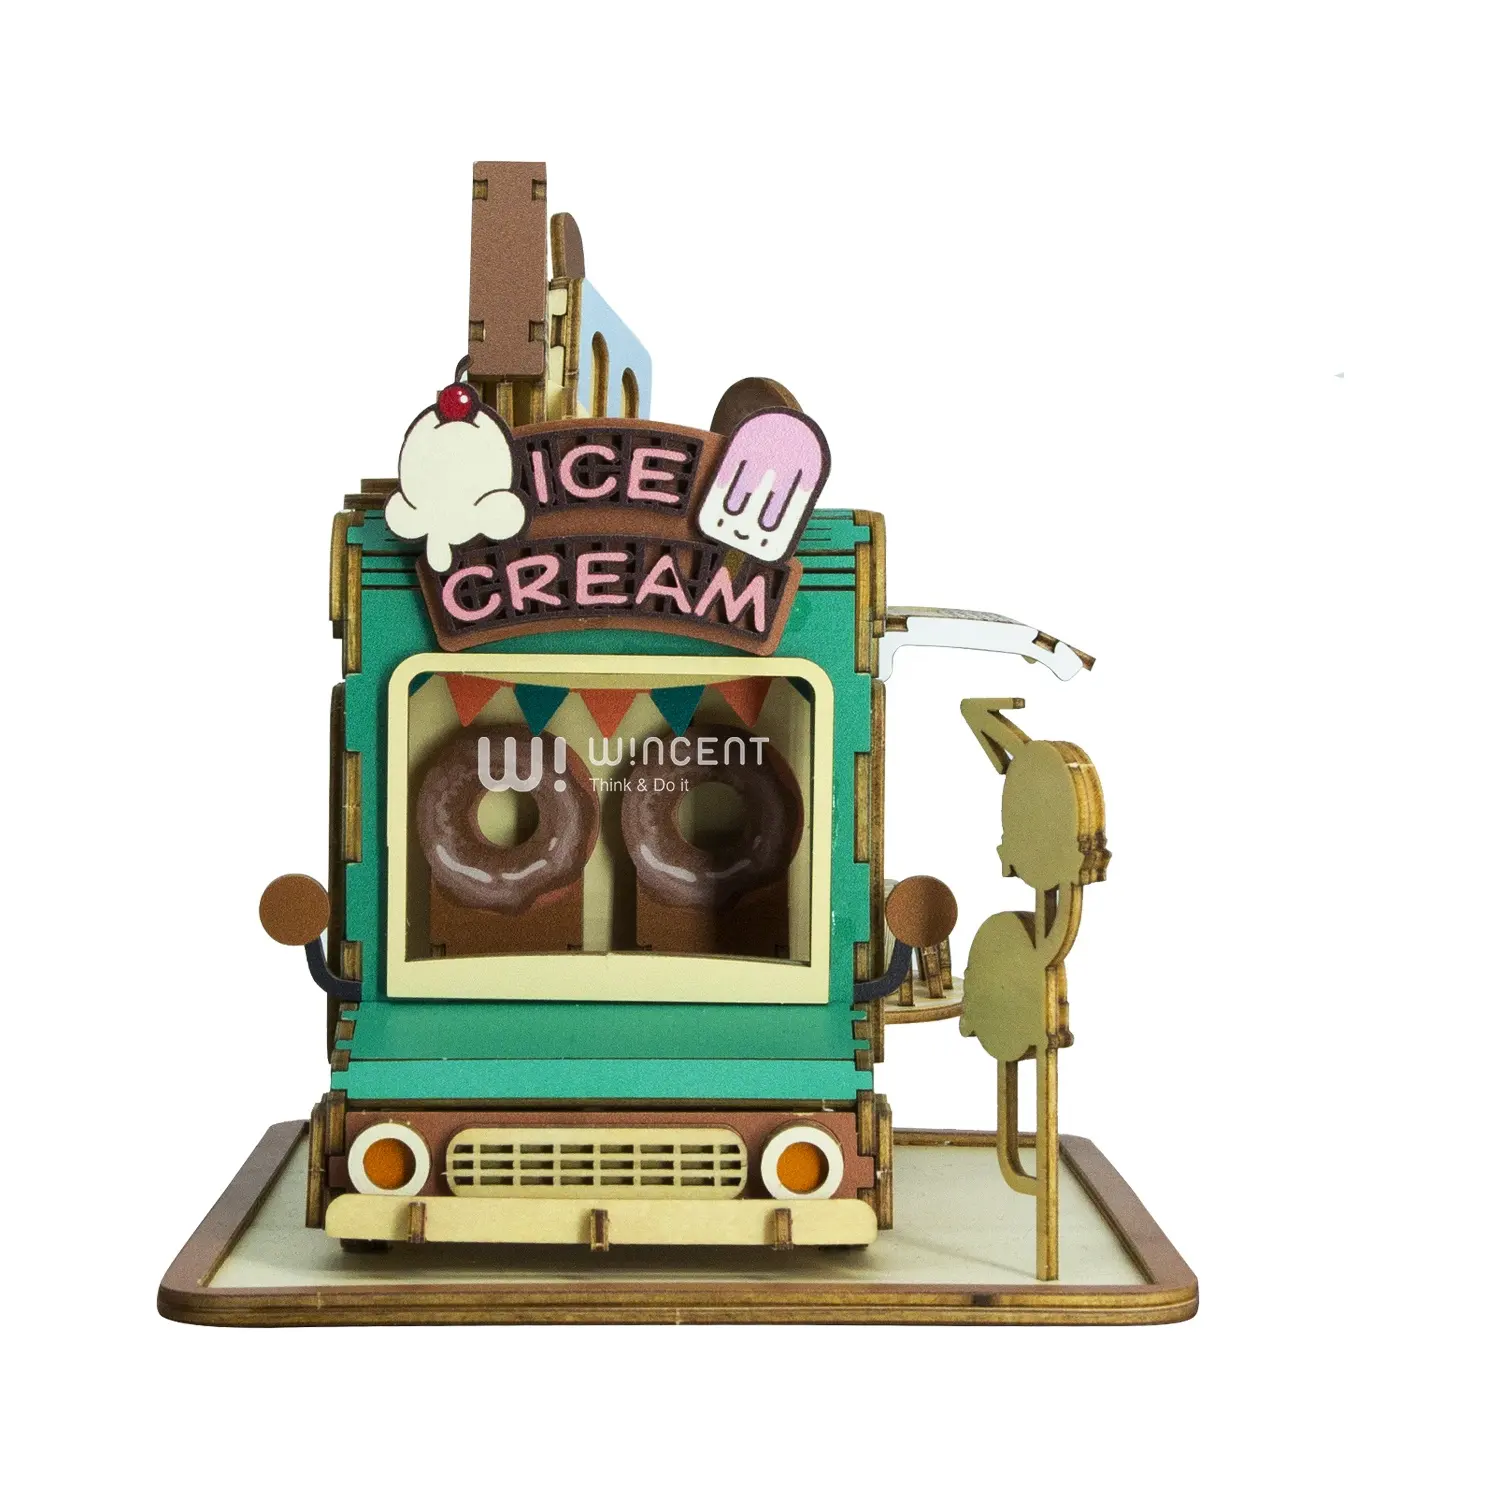 Wincent New Product Assemble Ice cream truck DIY Miniature Doll House wooden puzzle 3d toy miniature diy